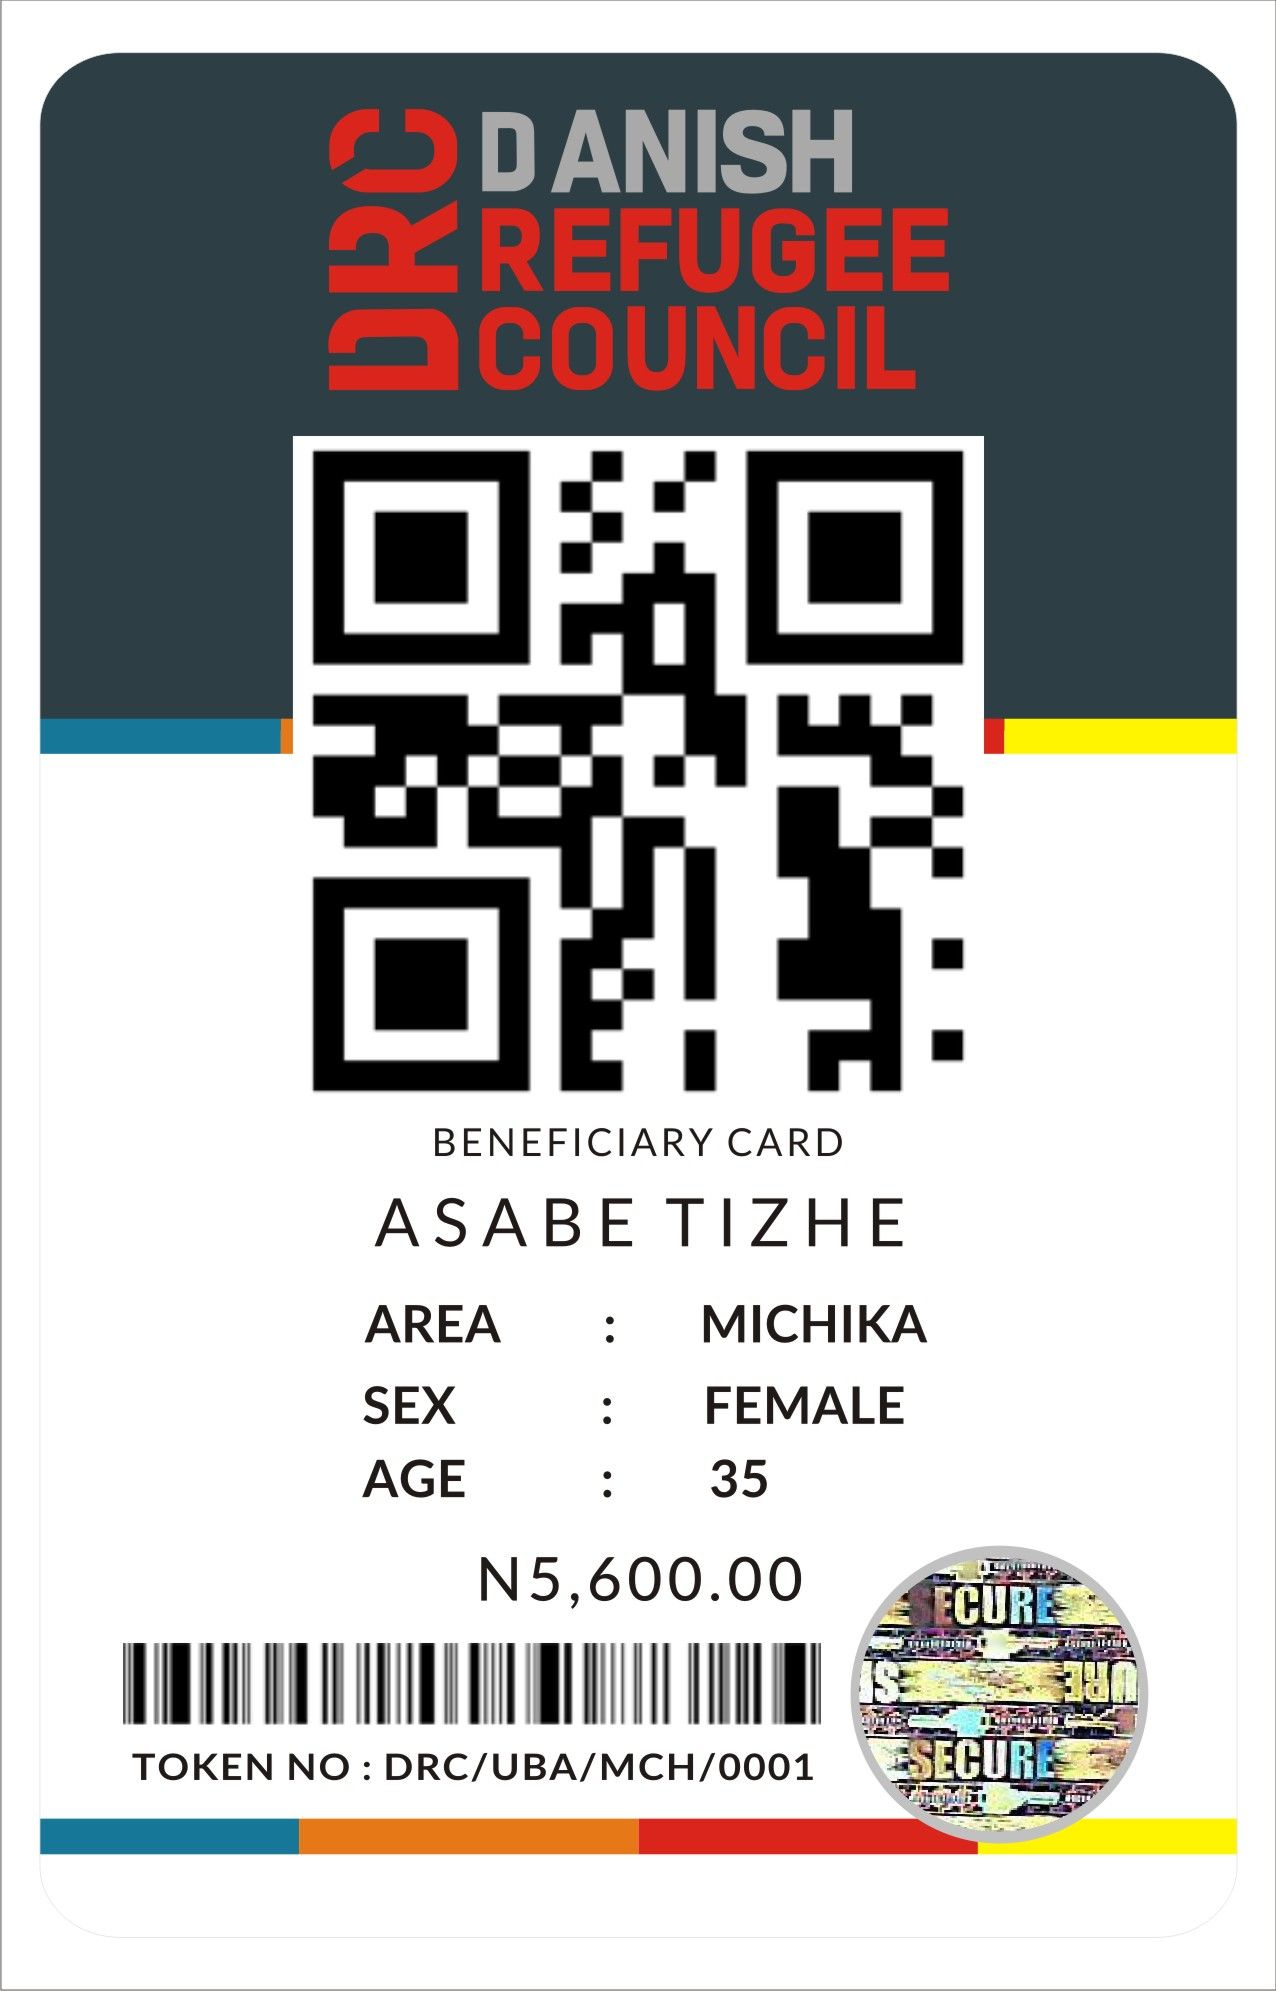 CALL CHINEDU ON 09022536974 TO PRINT AUTHENTICATION LABEL STICKERS